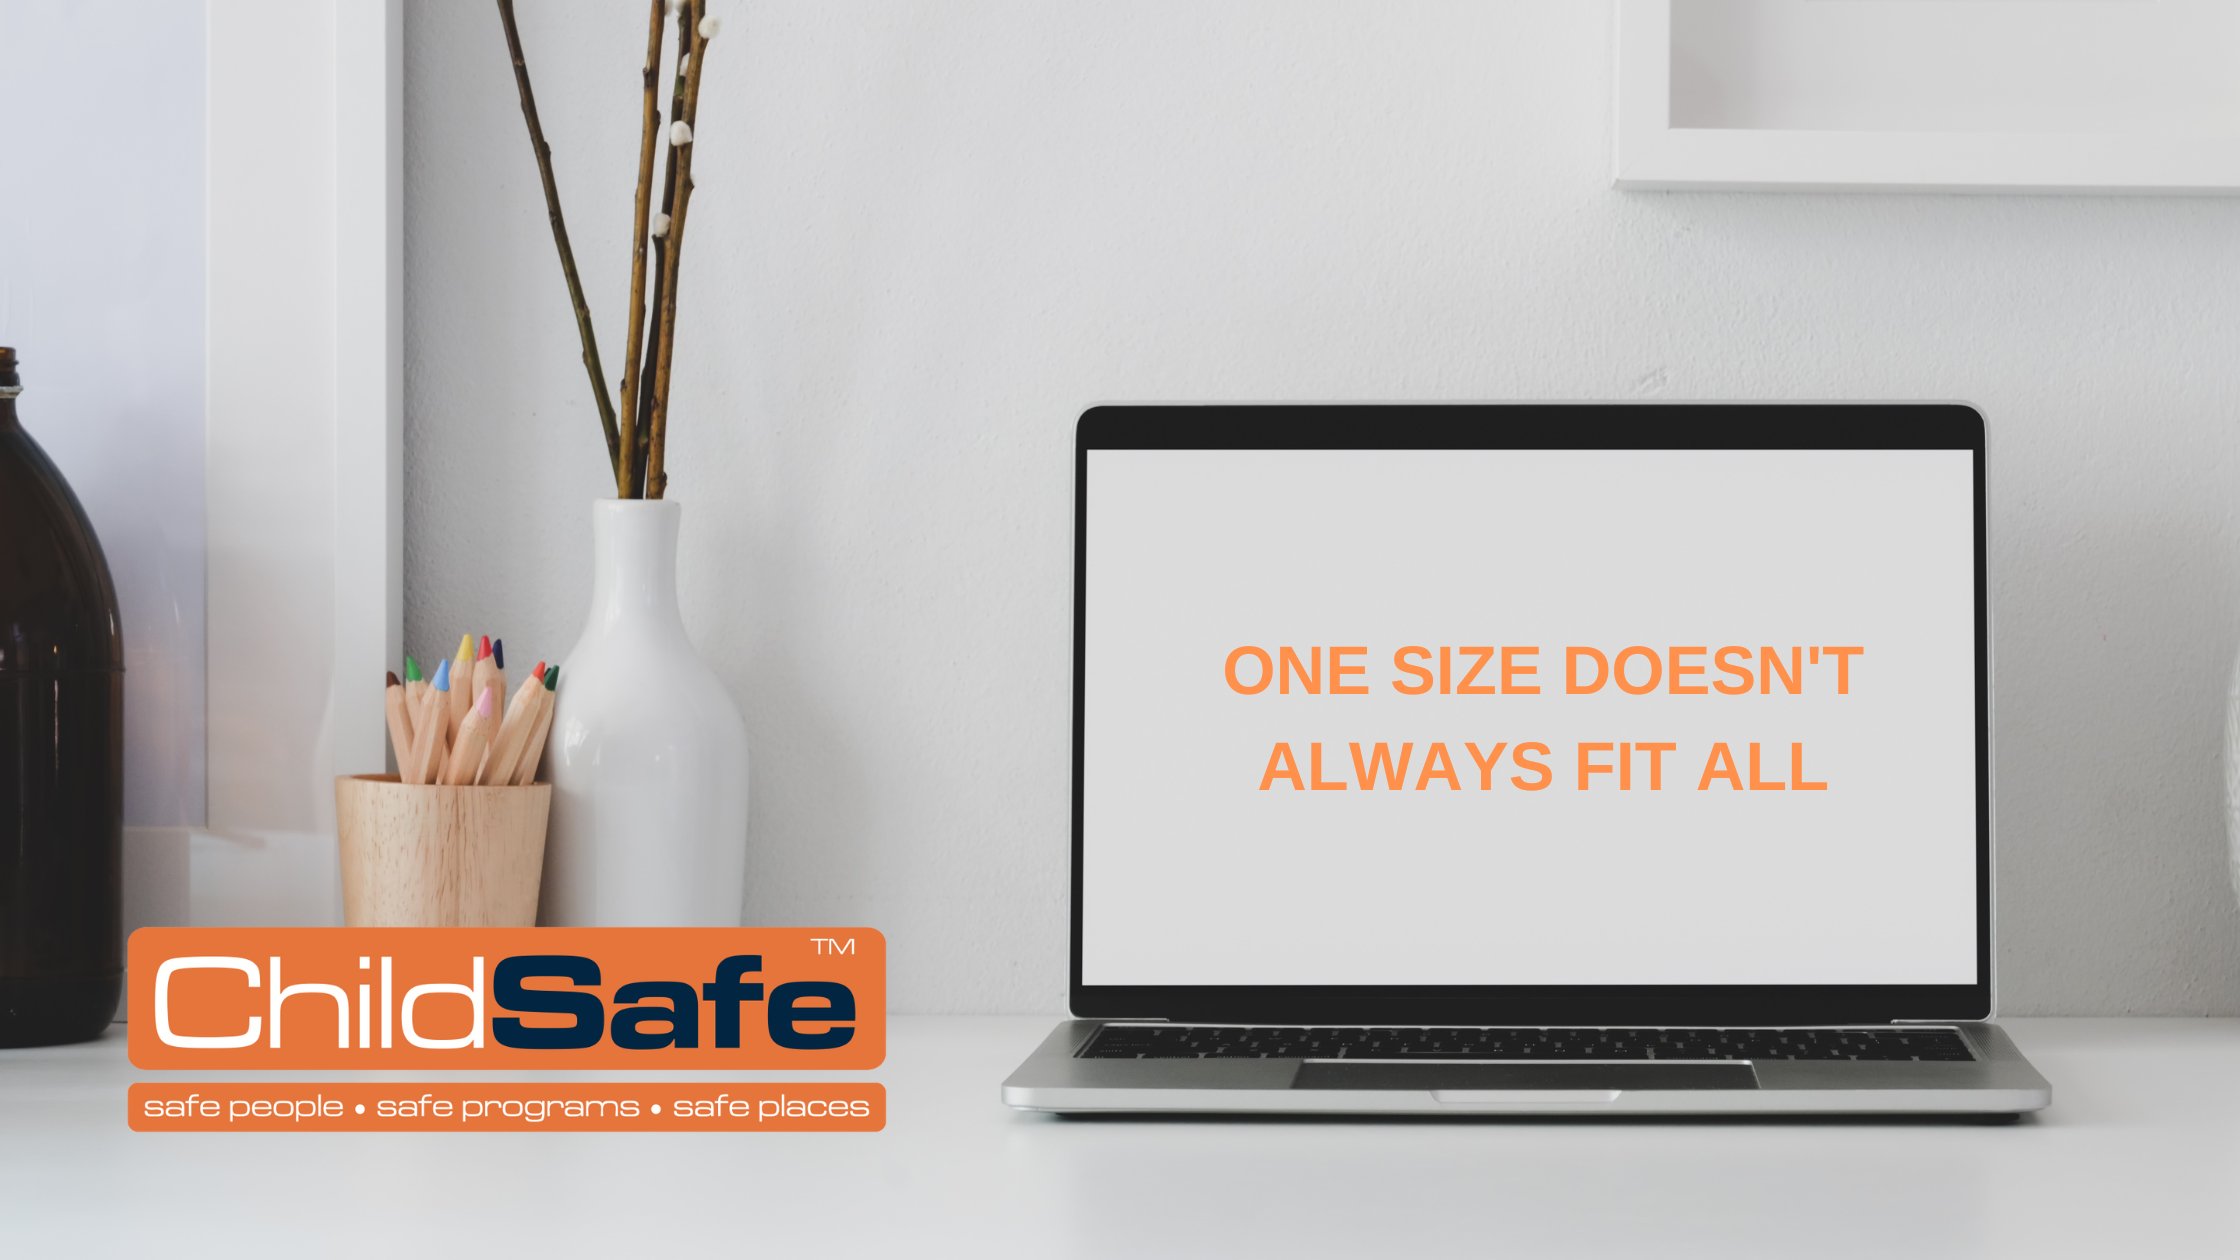 One size doesn’t always fit all